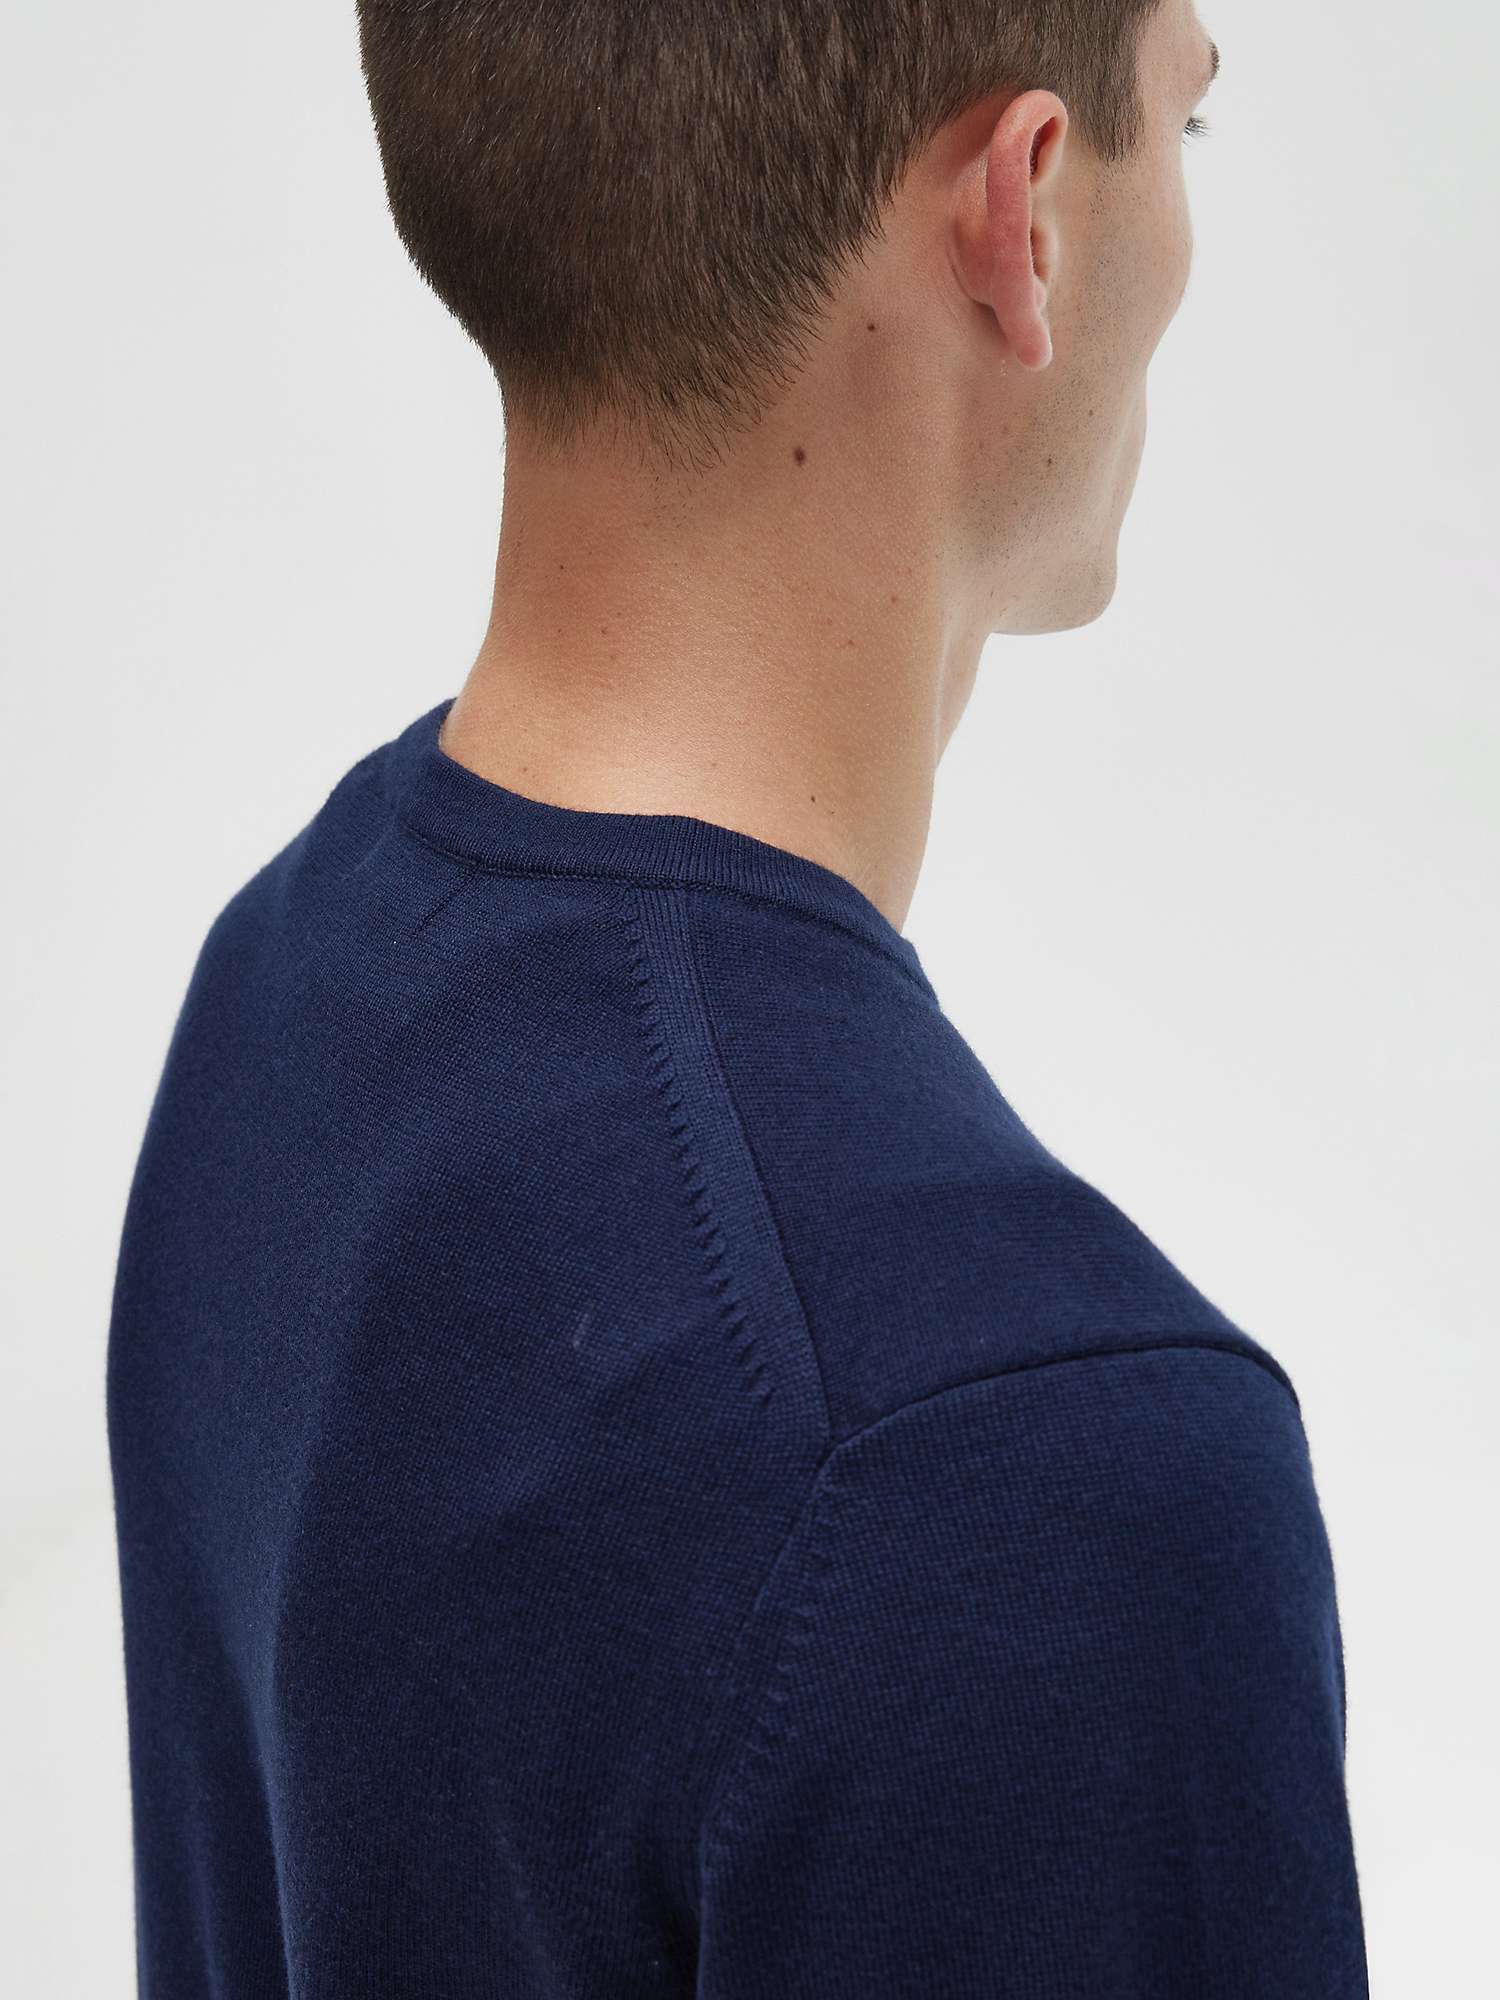 Fred Perry Classic Crew Neck Knit Jumper, Navy at John Lewis & Partners